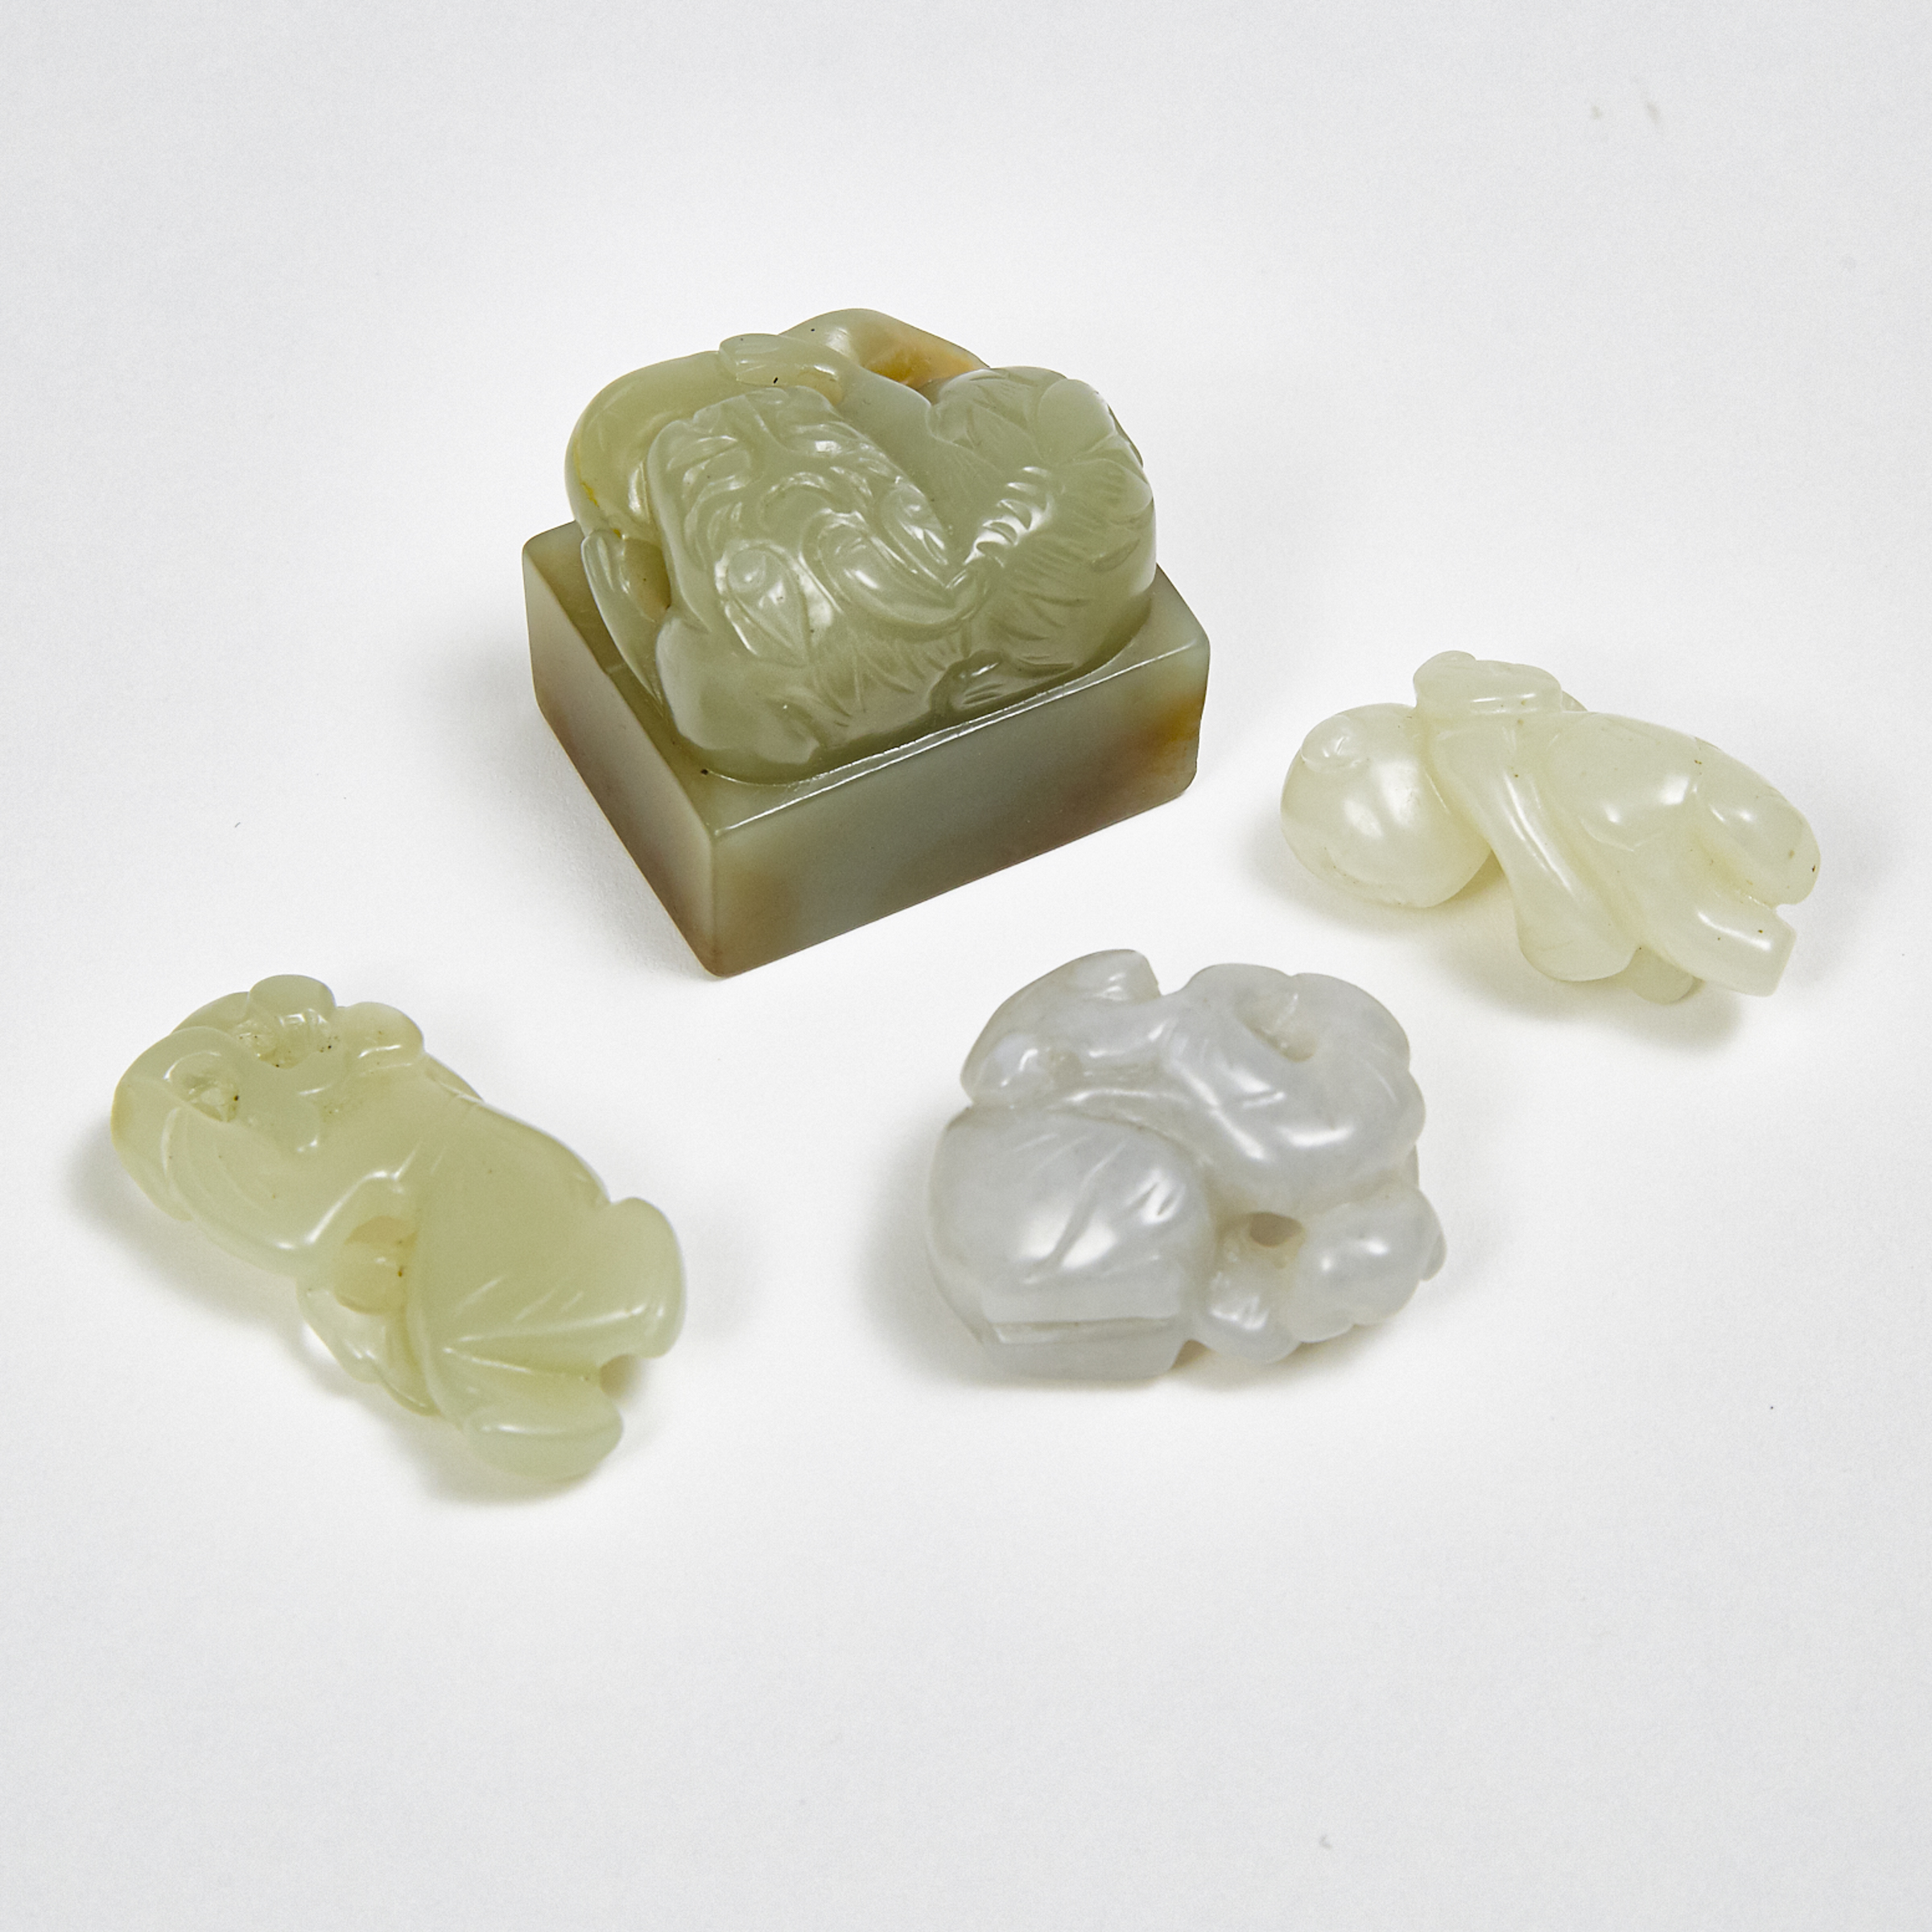 A Group of Three Jade Carved Boys, together with a 'Beast' Square Seal